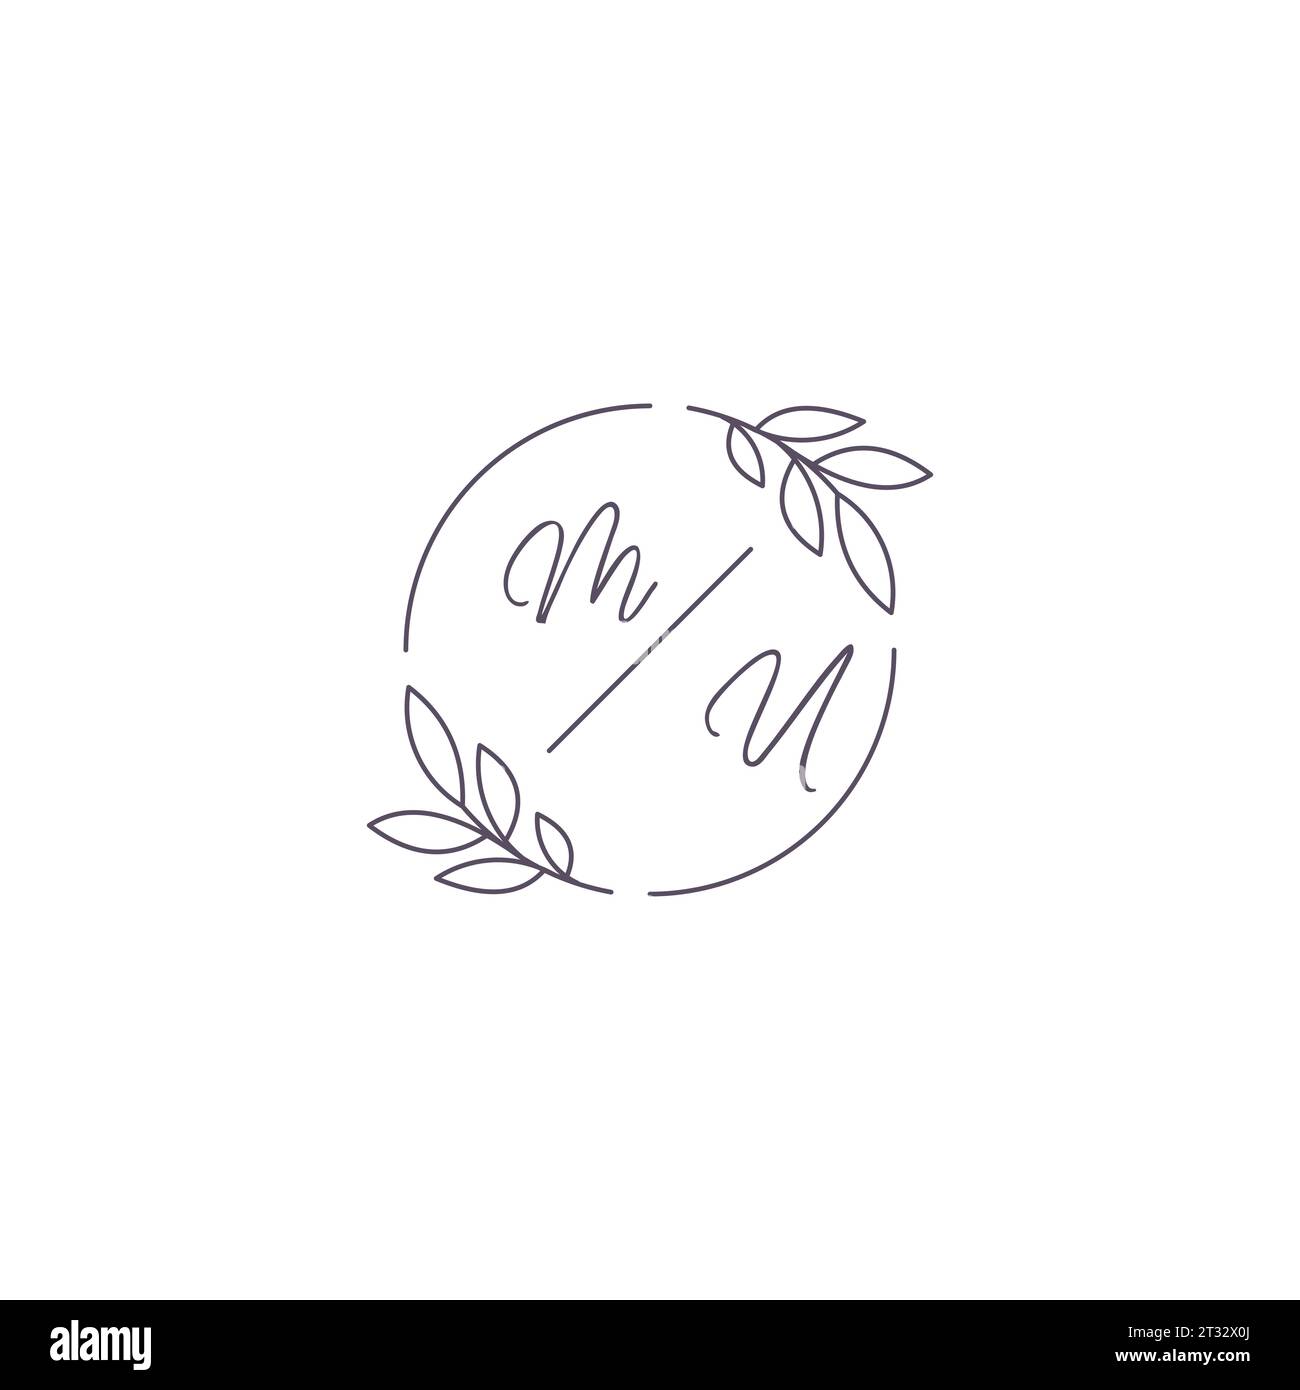 Initials MU monogram wedding logo with simple leaf outline and circle style vector graphic Stock Vector